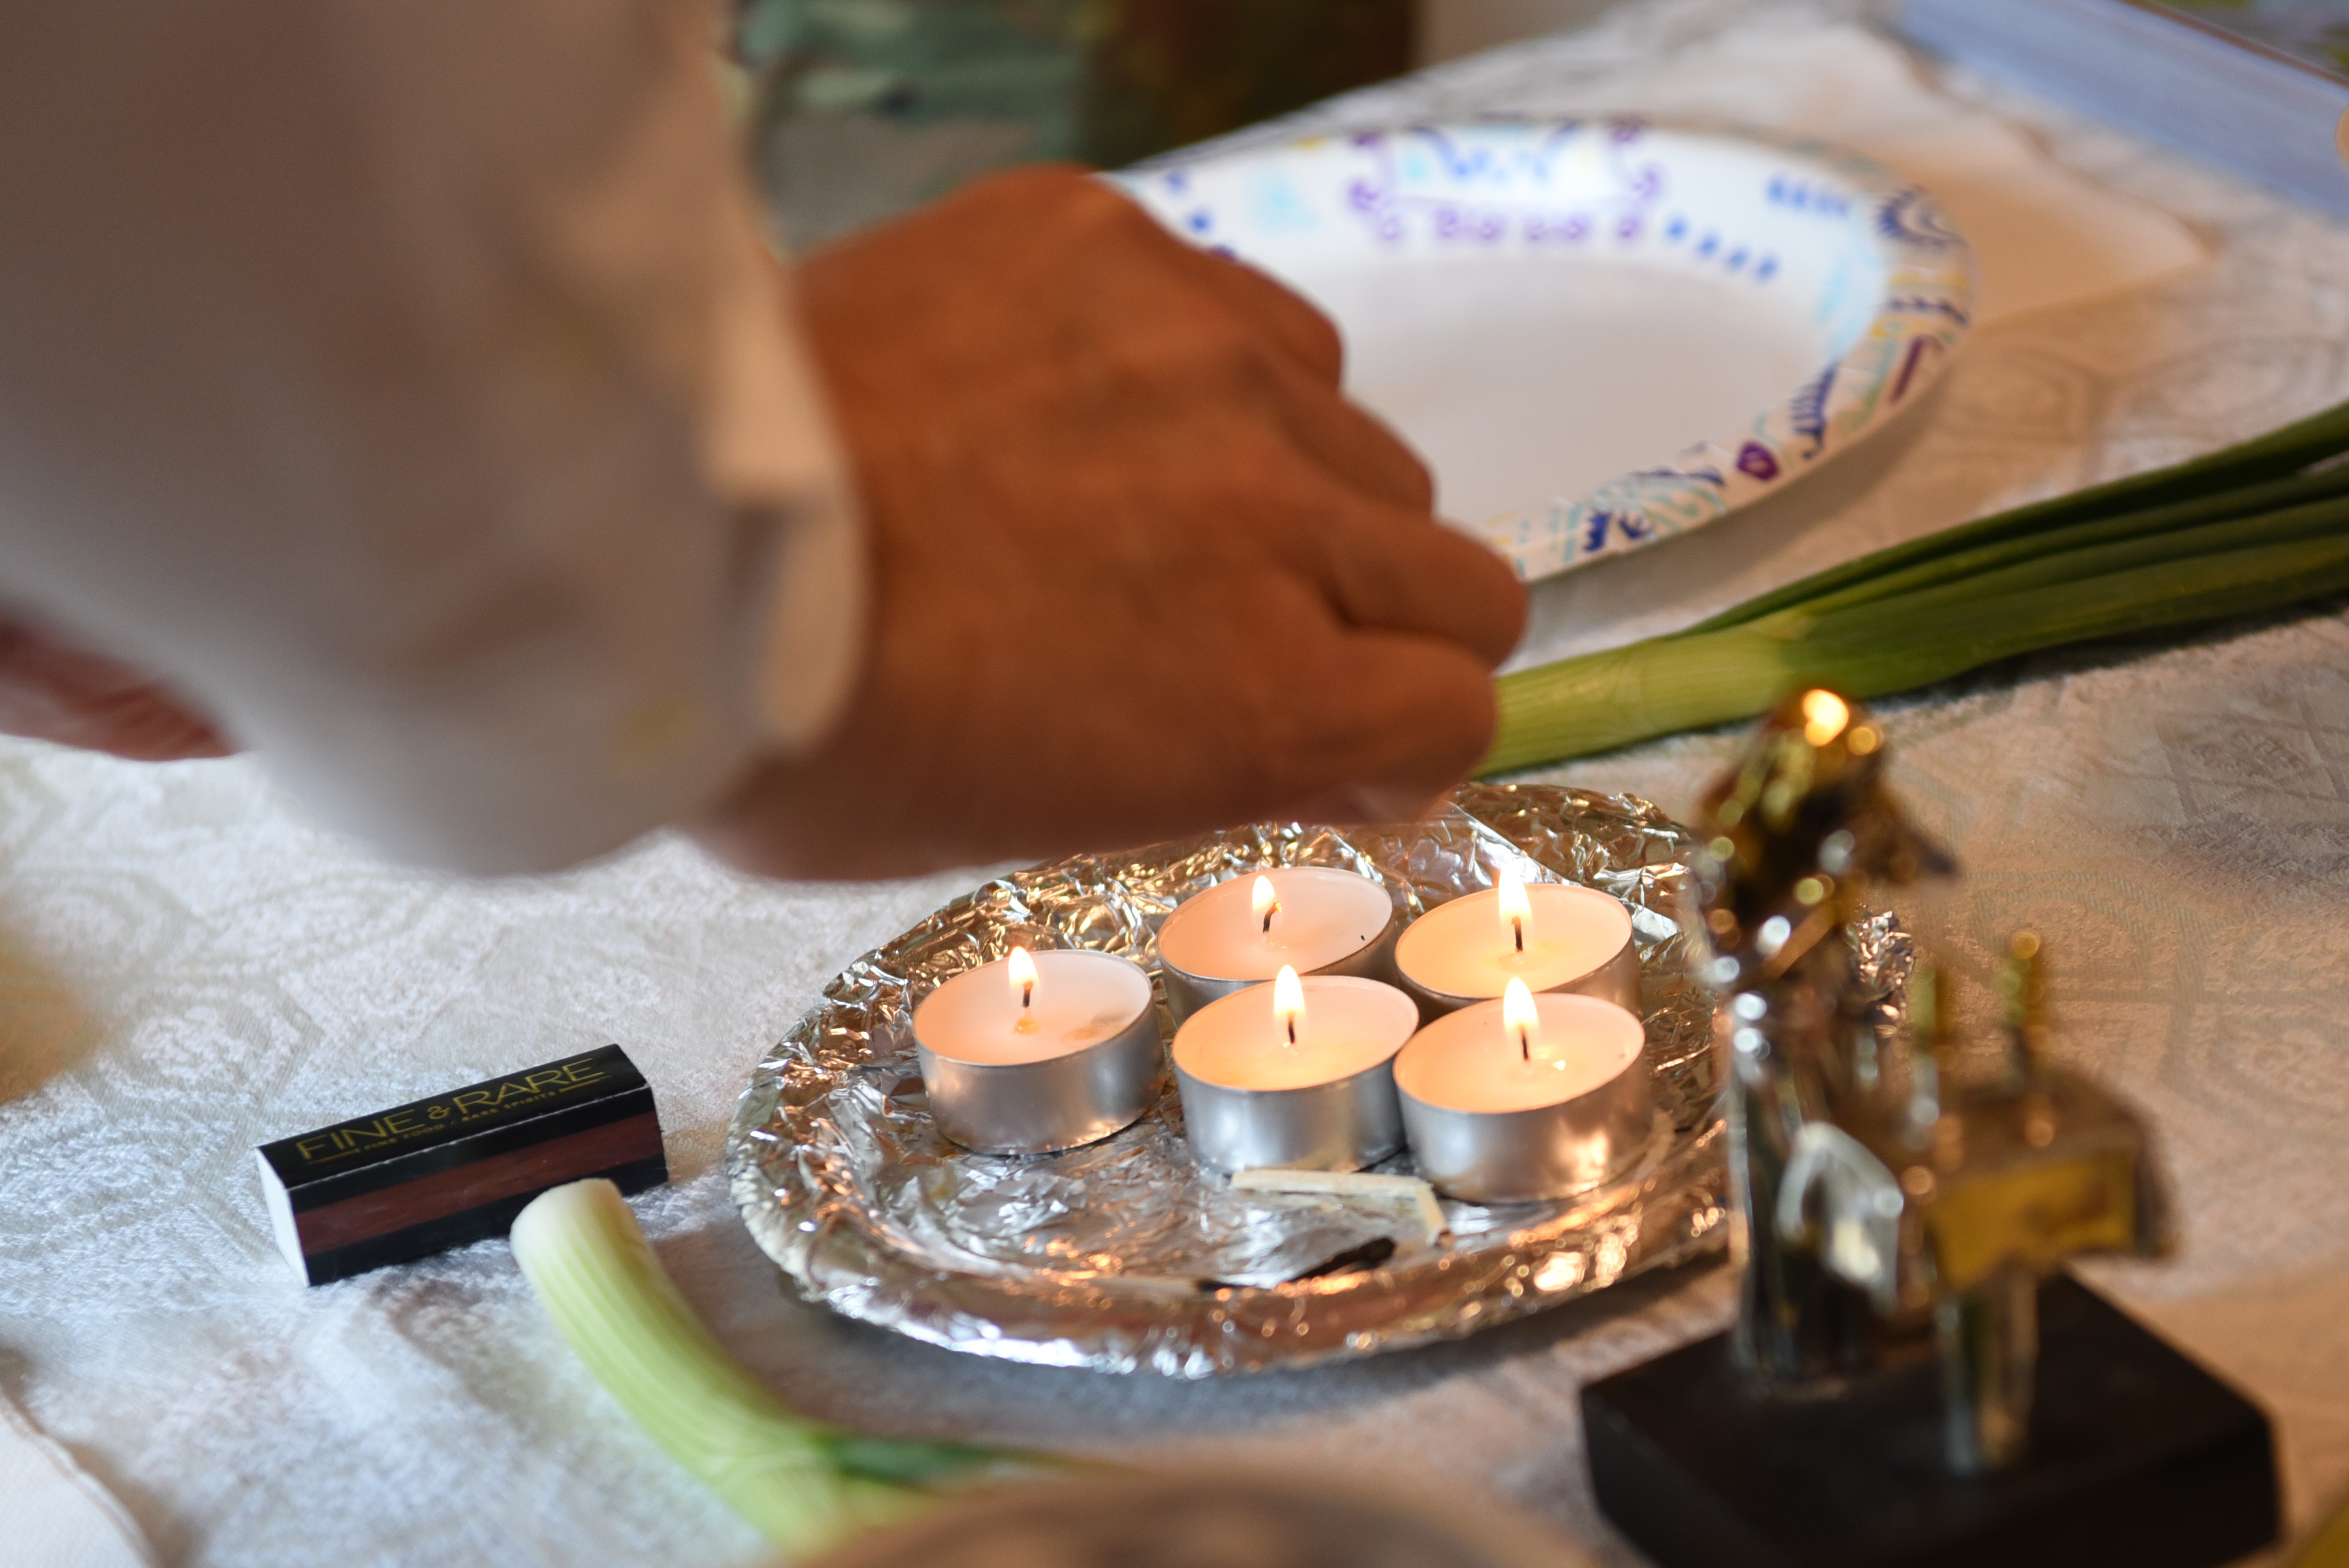 Small candles being lit on a table